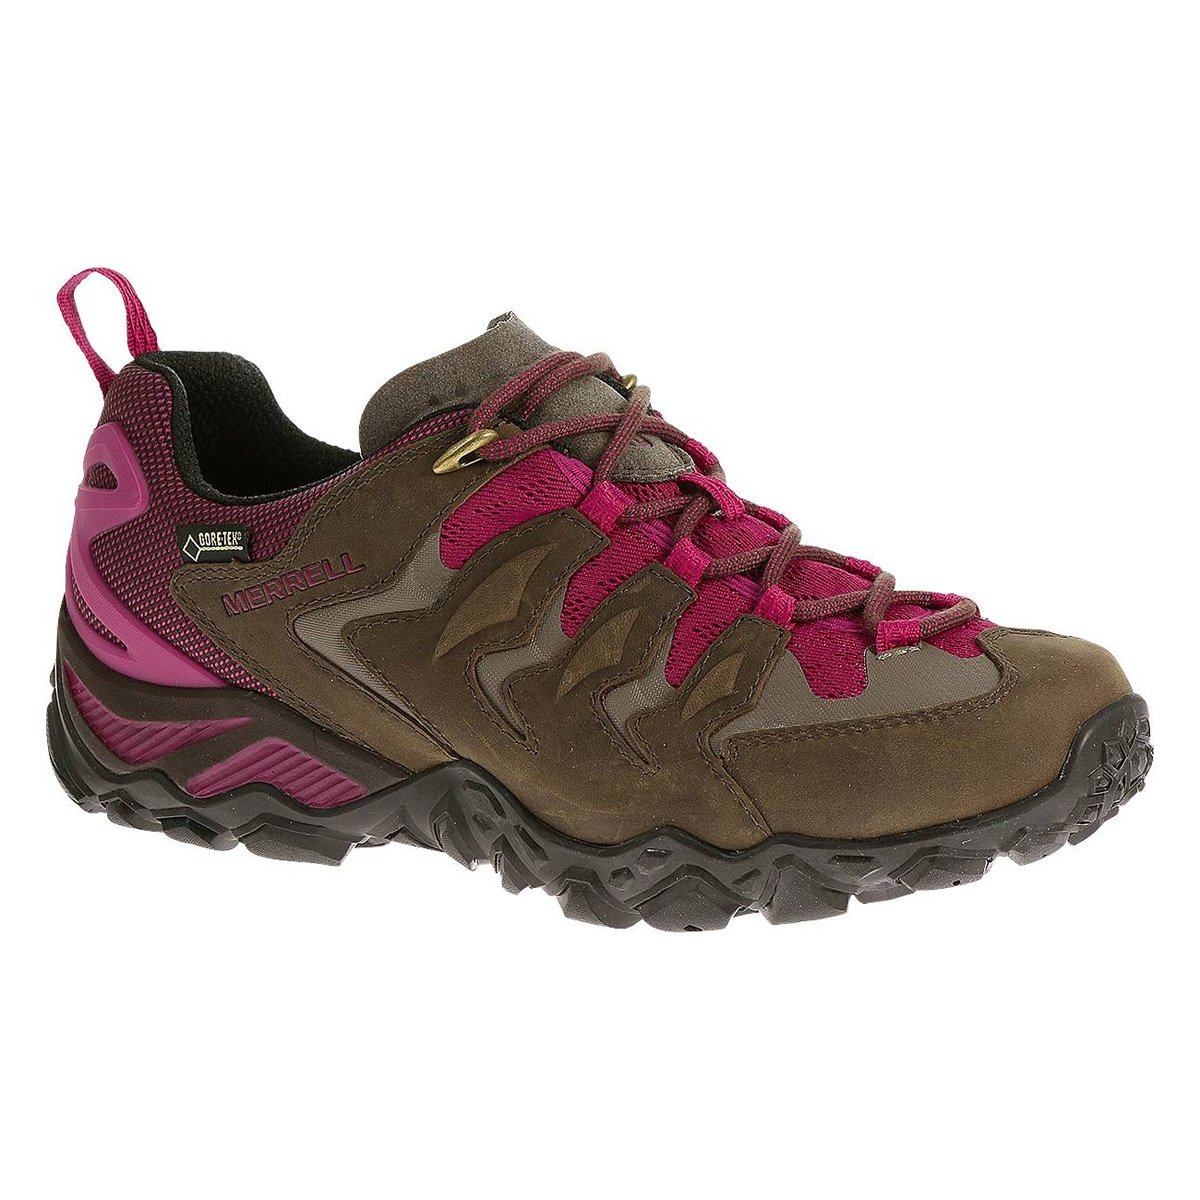 Merrell Chameleon Shift Vent GTX Womens / Girls Walking Shoes - Stockpoint Apparel Outlet